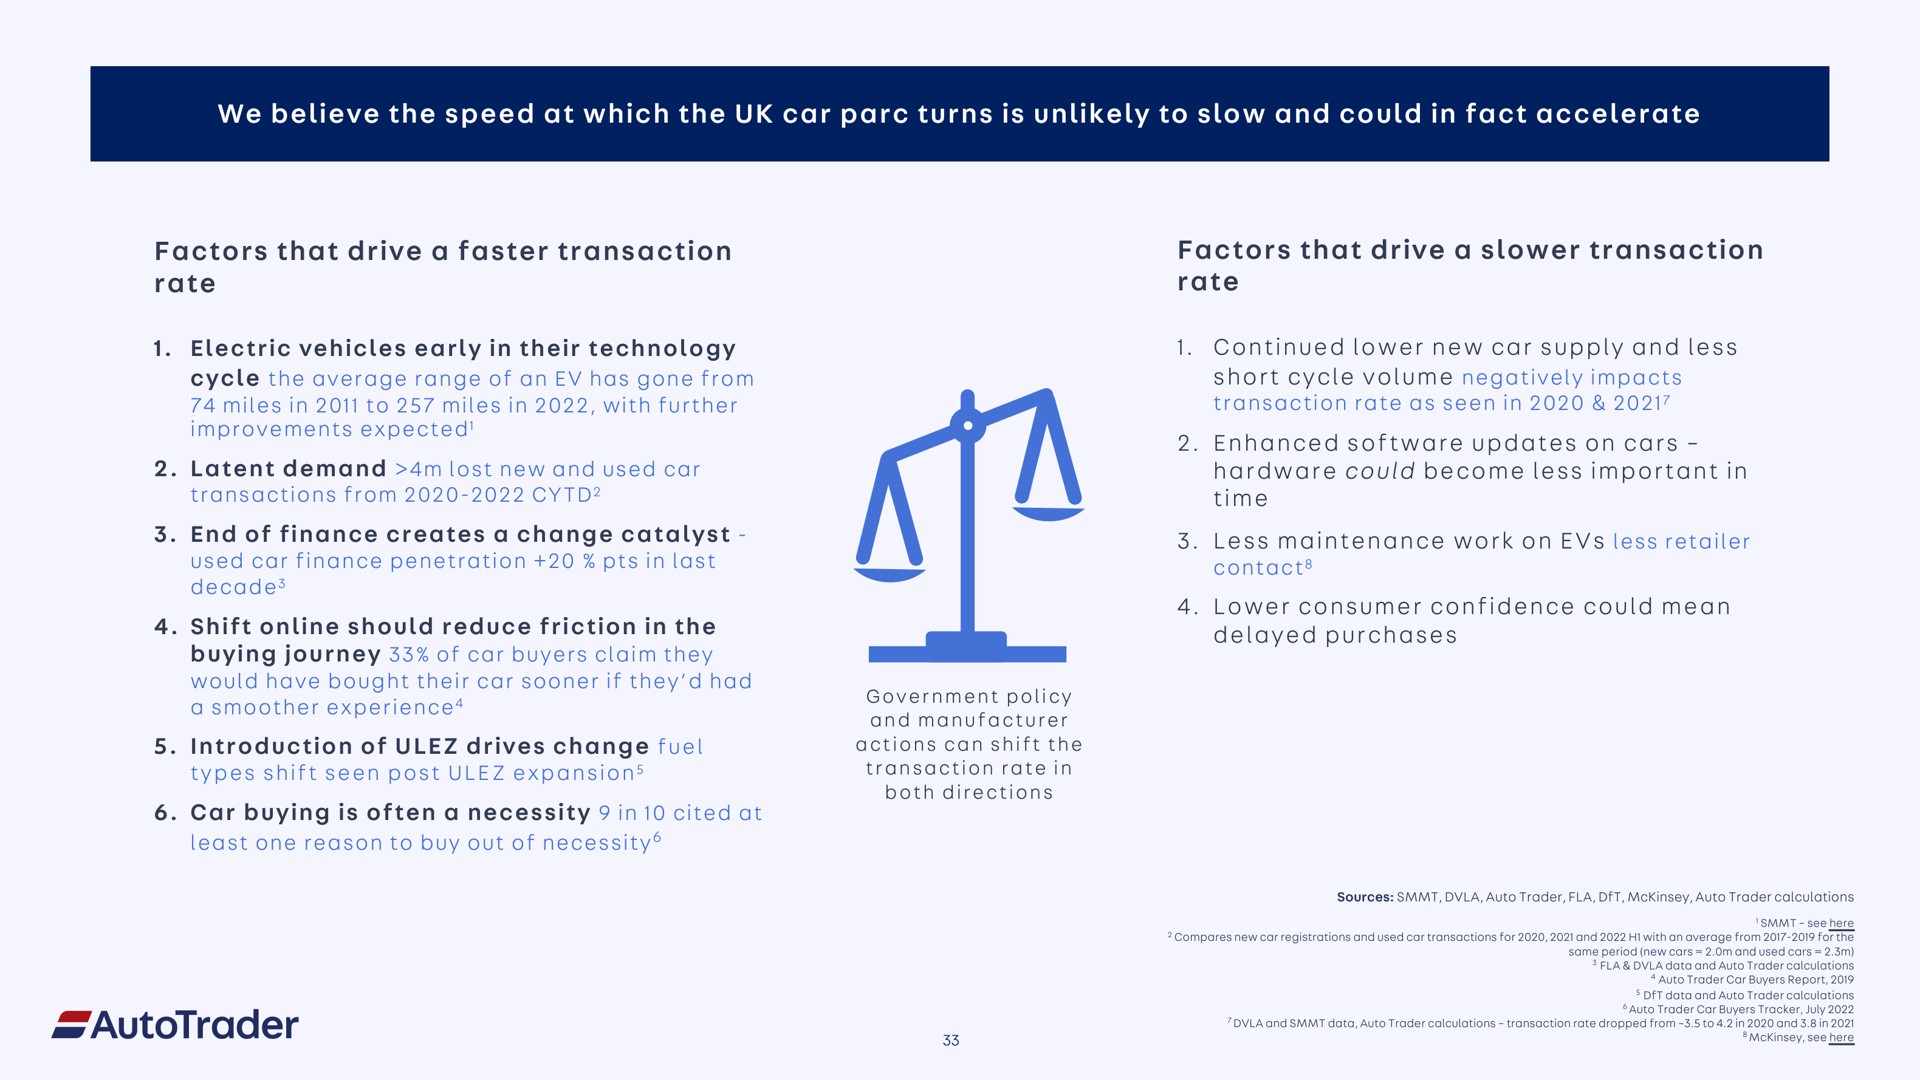 we believe the speed at which the car turns is unlikely to slow and could in fact accelerate factors that drive a faster transaction rate factors that drive a transaction rate | Auto Trader Group